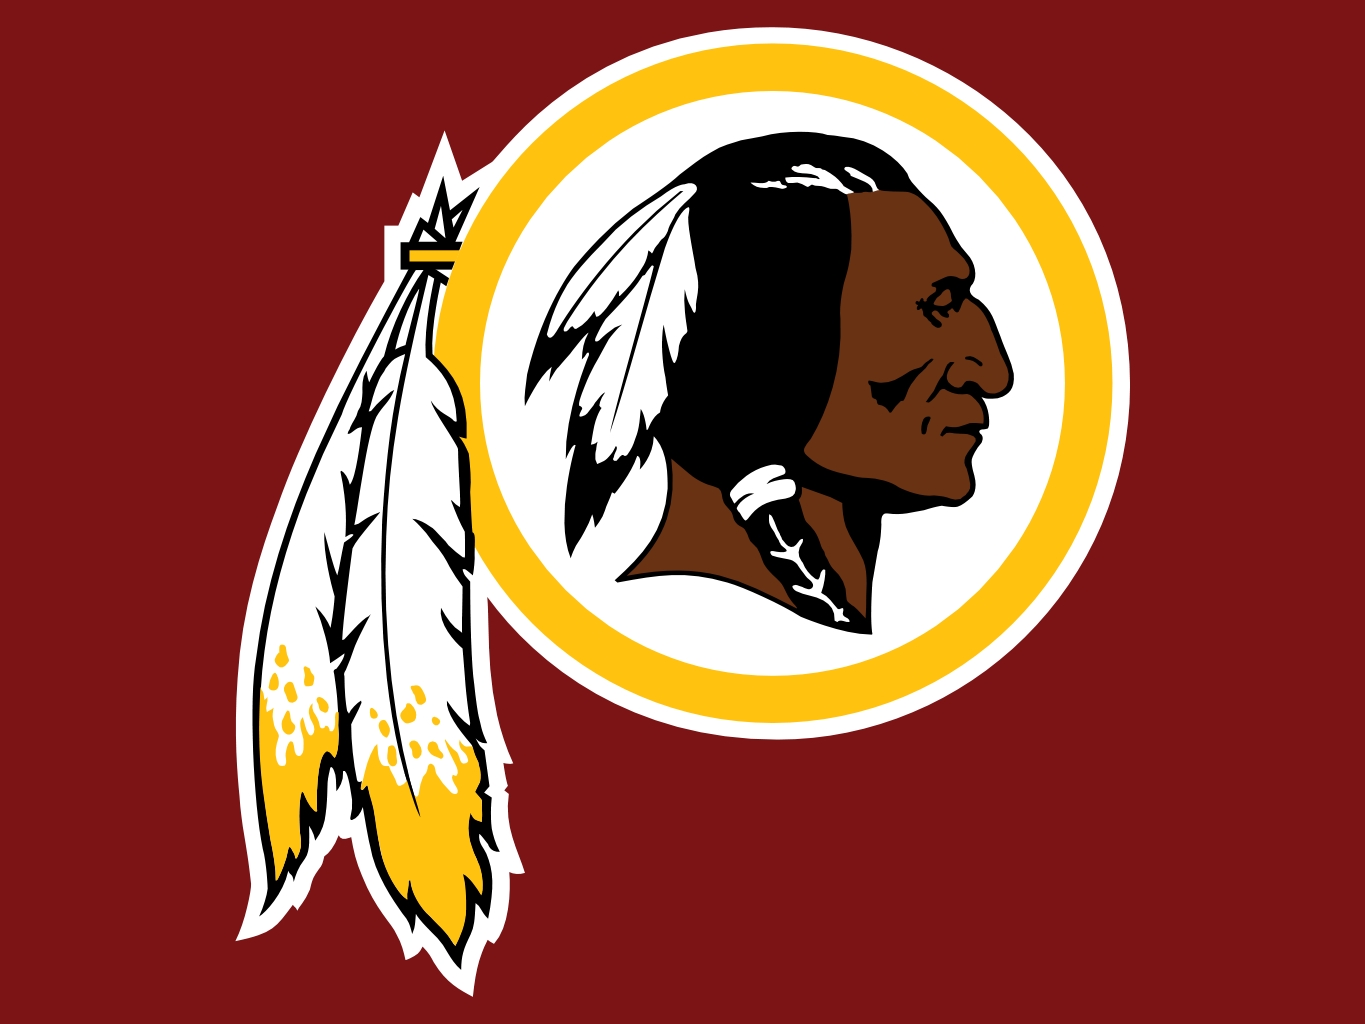 Why Did the Redskins Lose Their Trademark Protection? | Blog